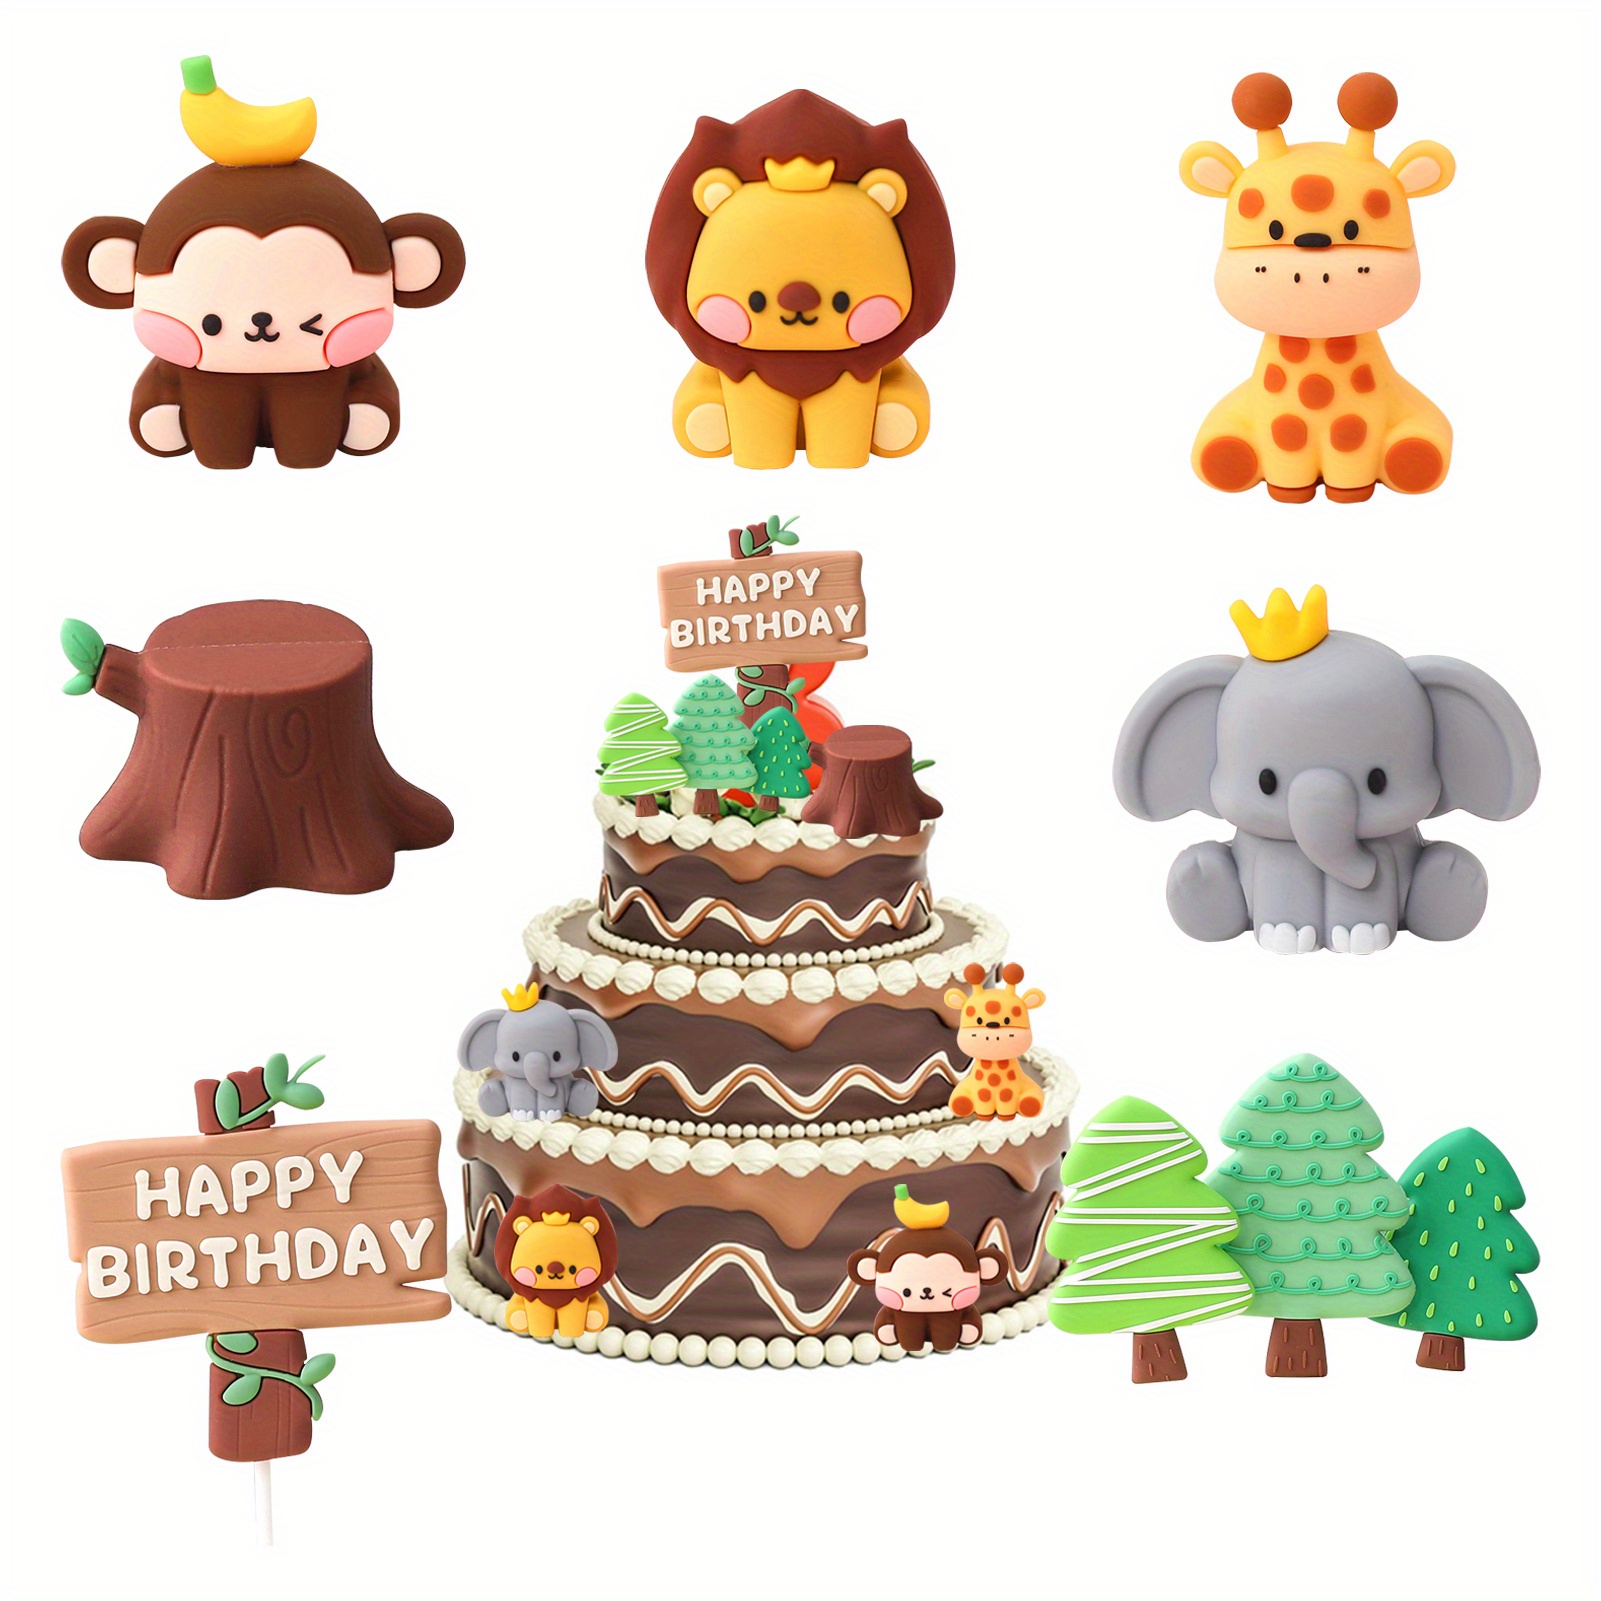 

7pcs Jungle Animals Cake Toppers, Soft Plastic Safari Figurines, Happy Birthday Cupcake Decorations For Party